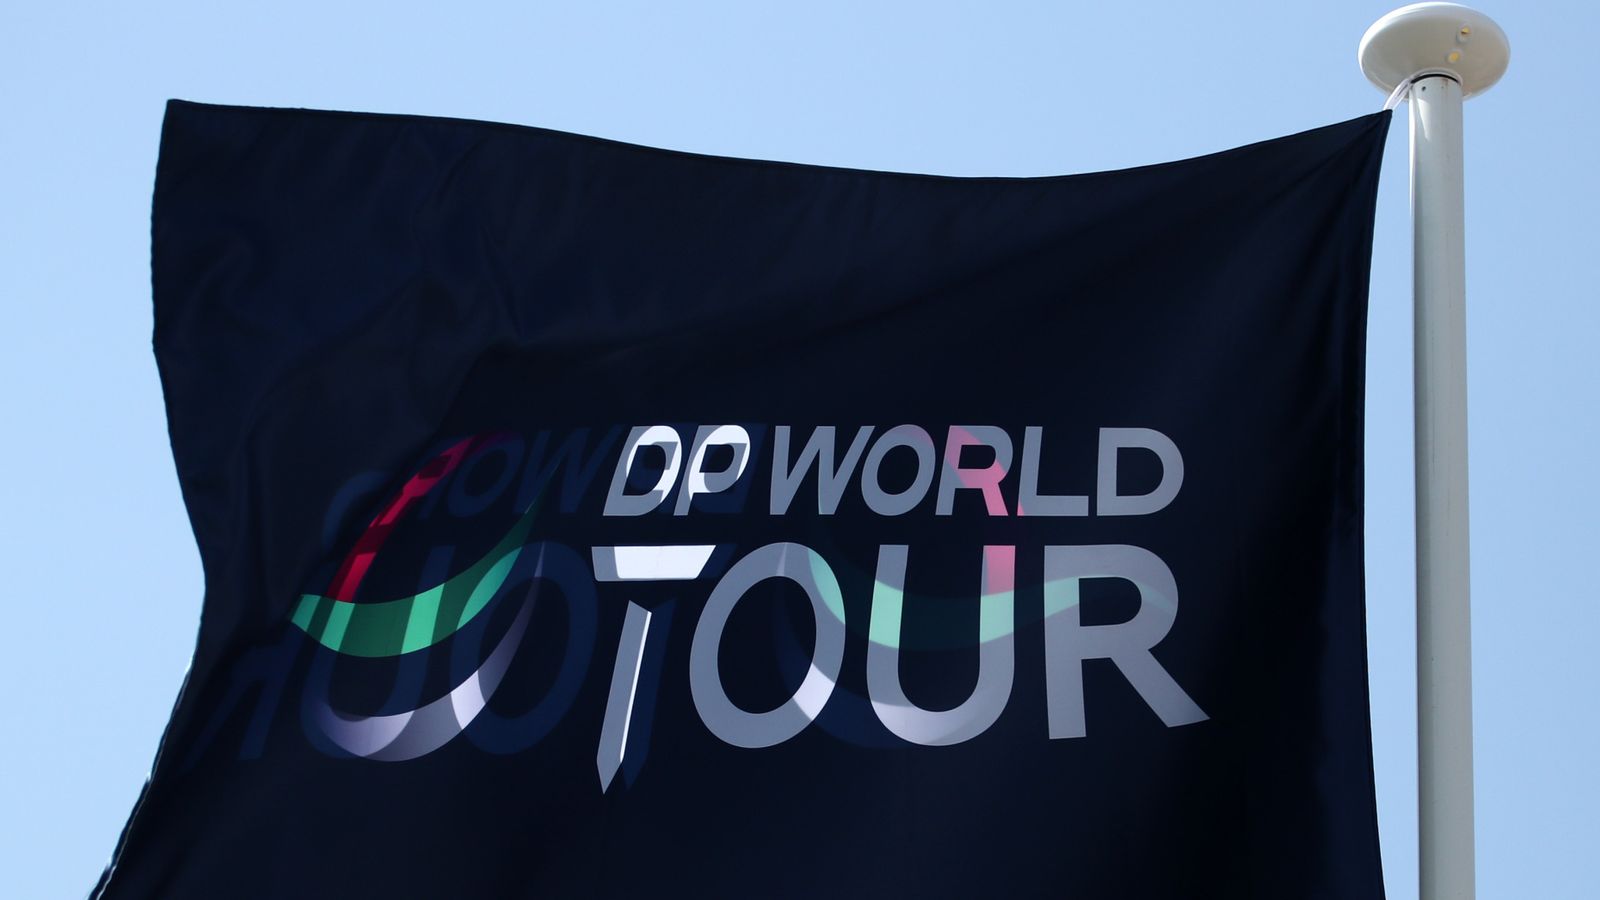 DP World Tour players given pay guarantee in response to LIV Golf